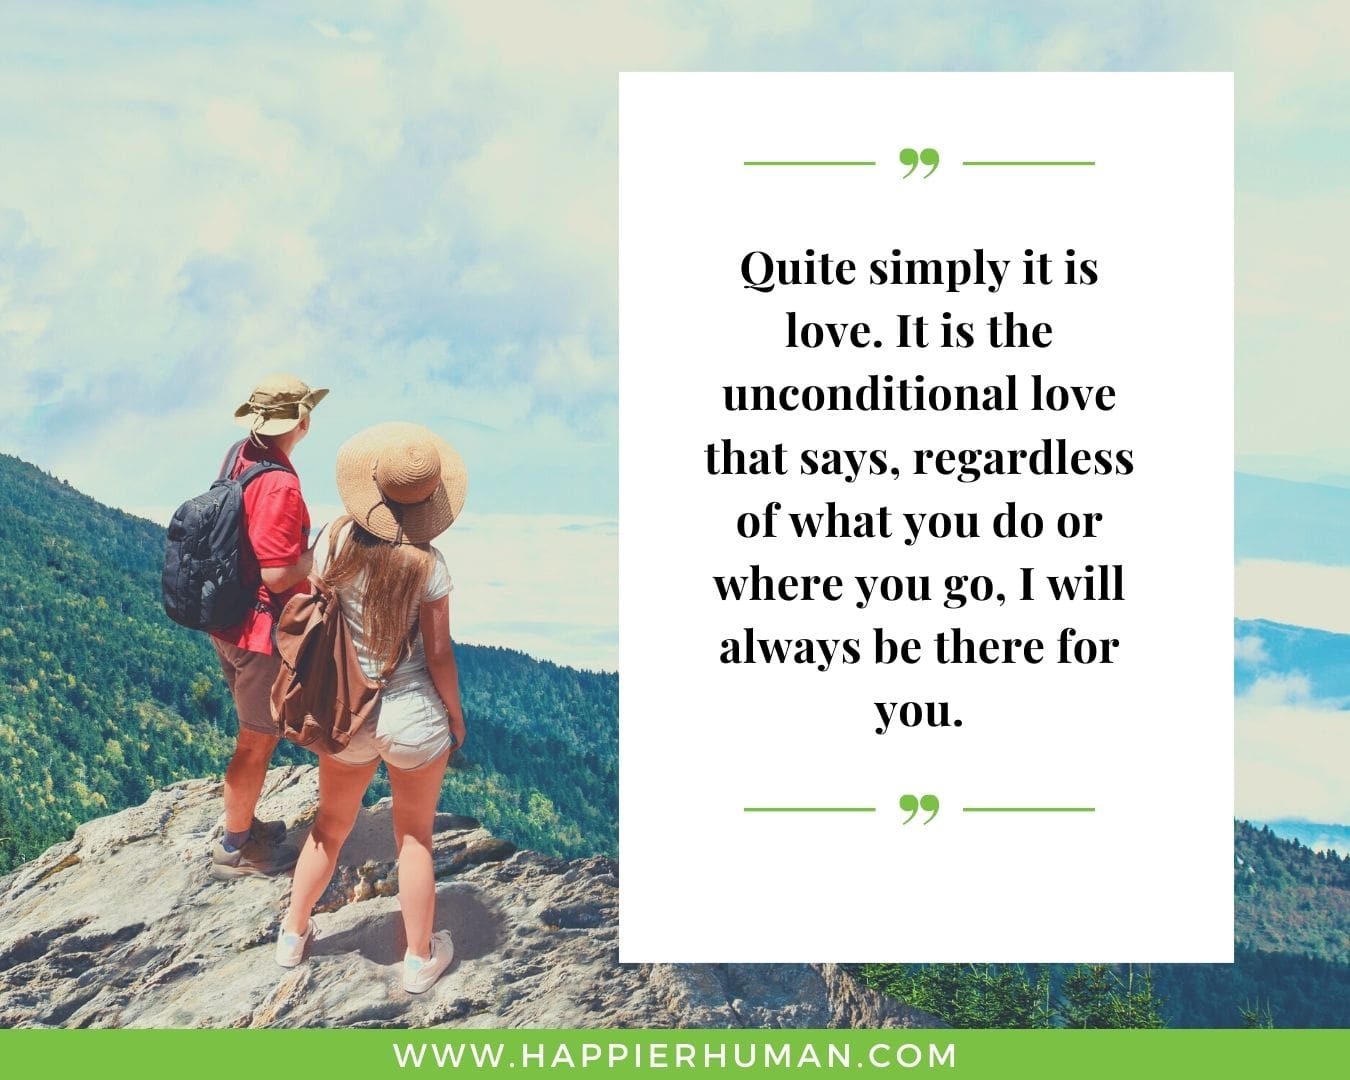 I’m Here for You Quotes - “Quite simply it is love. It is the unconditional love that says, regardless of what you do or where you go, I will always be there for you.”